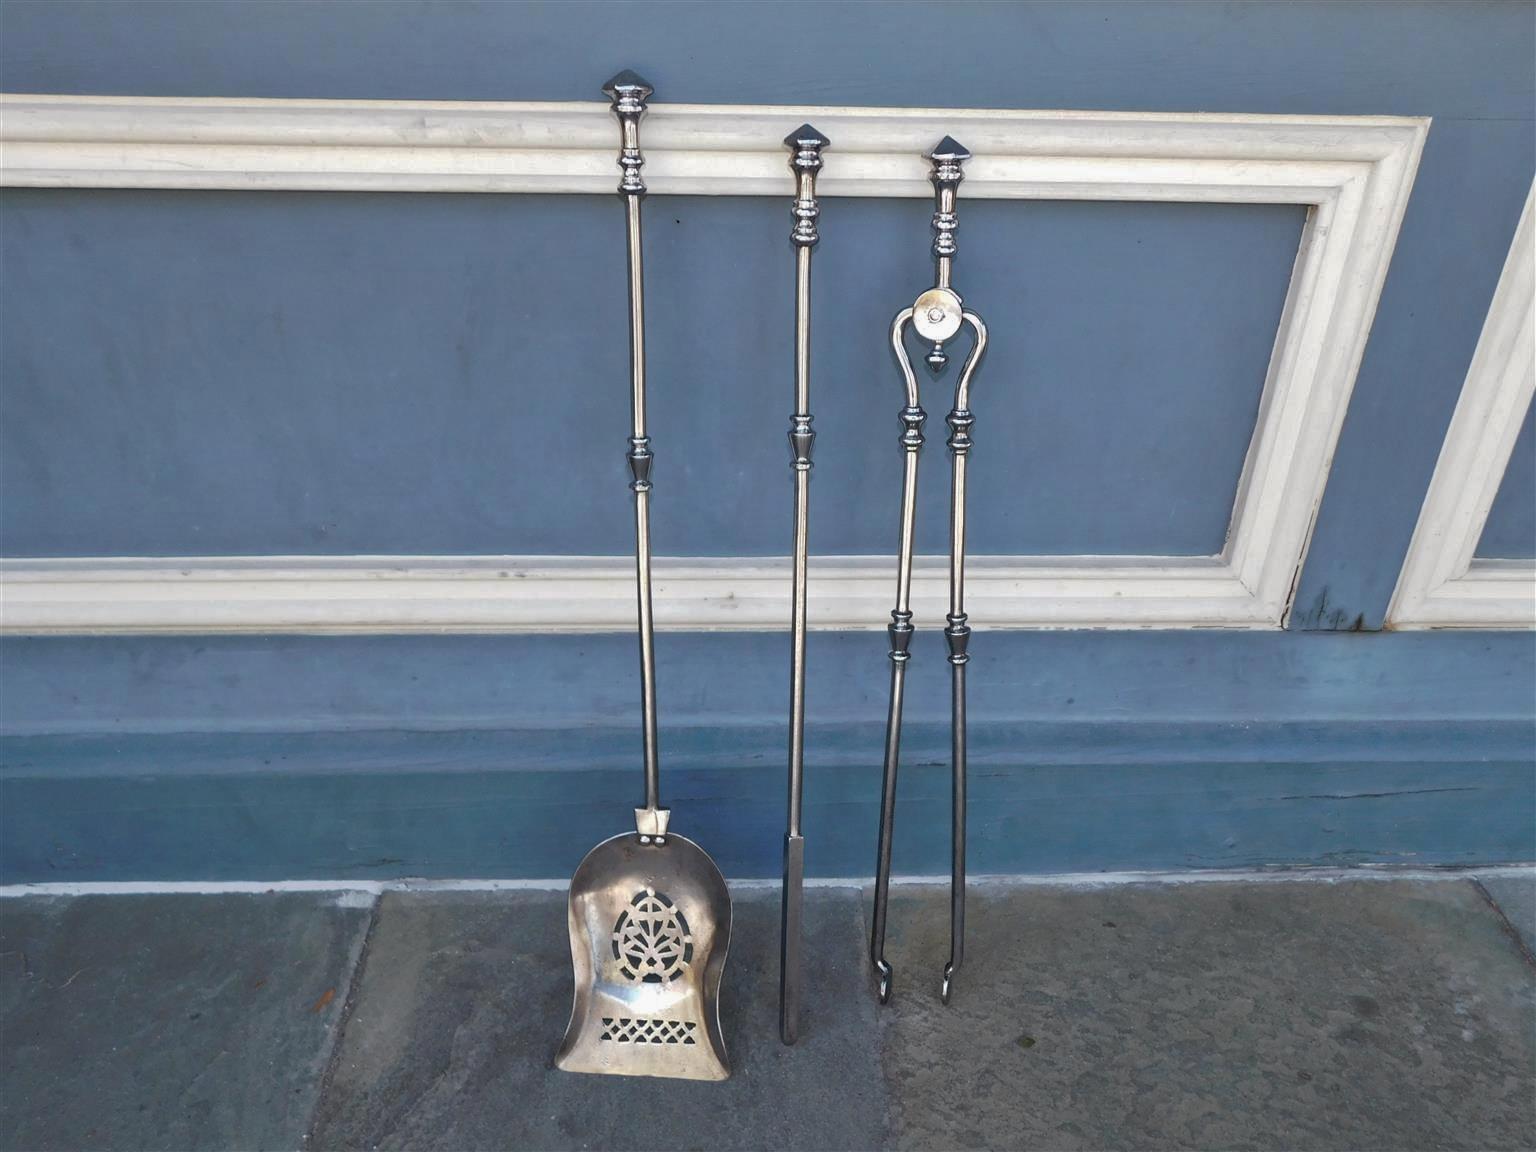 Set of English Urn Finial and pierced polished steel fire tools, late 18th century
Set consist of Shovel, Tong, and Poker.